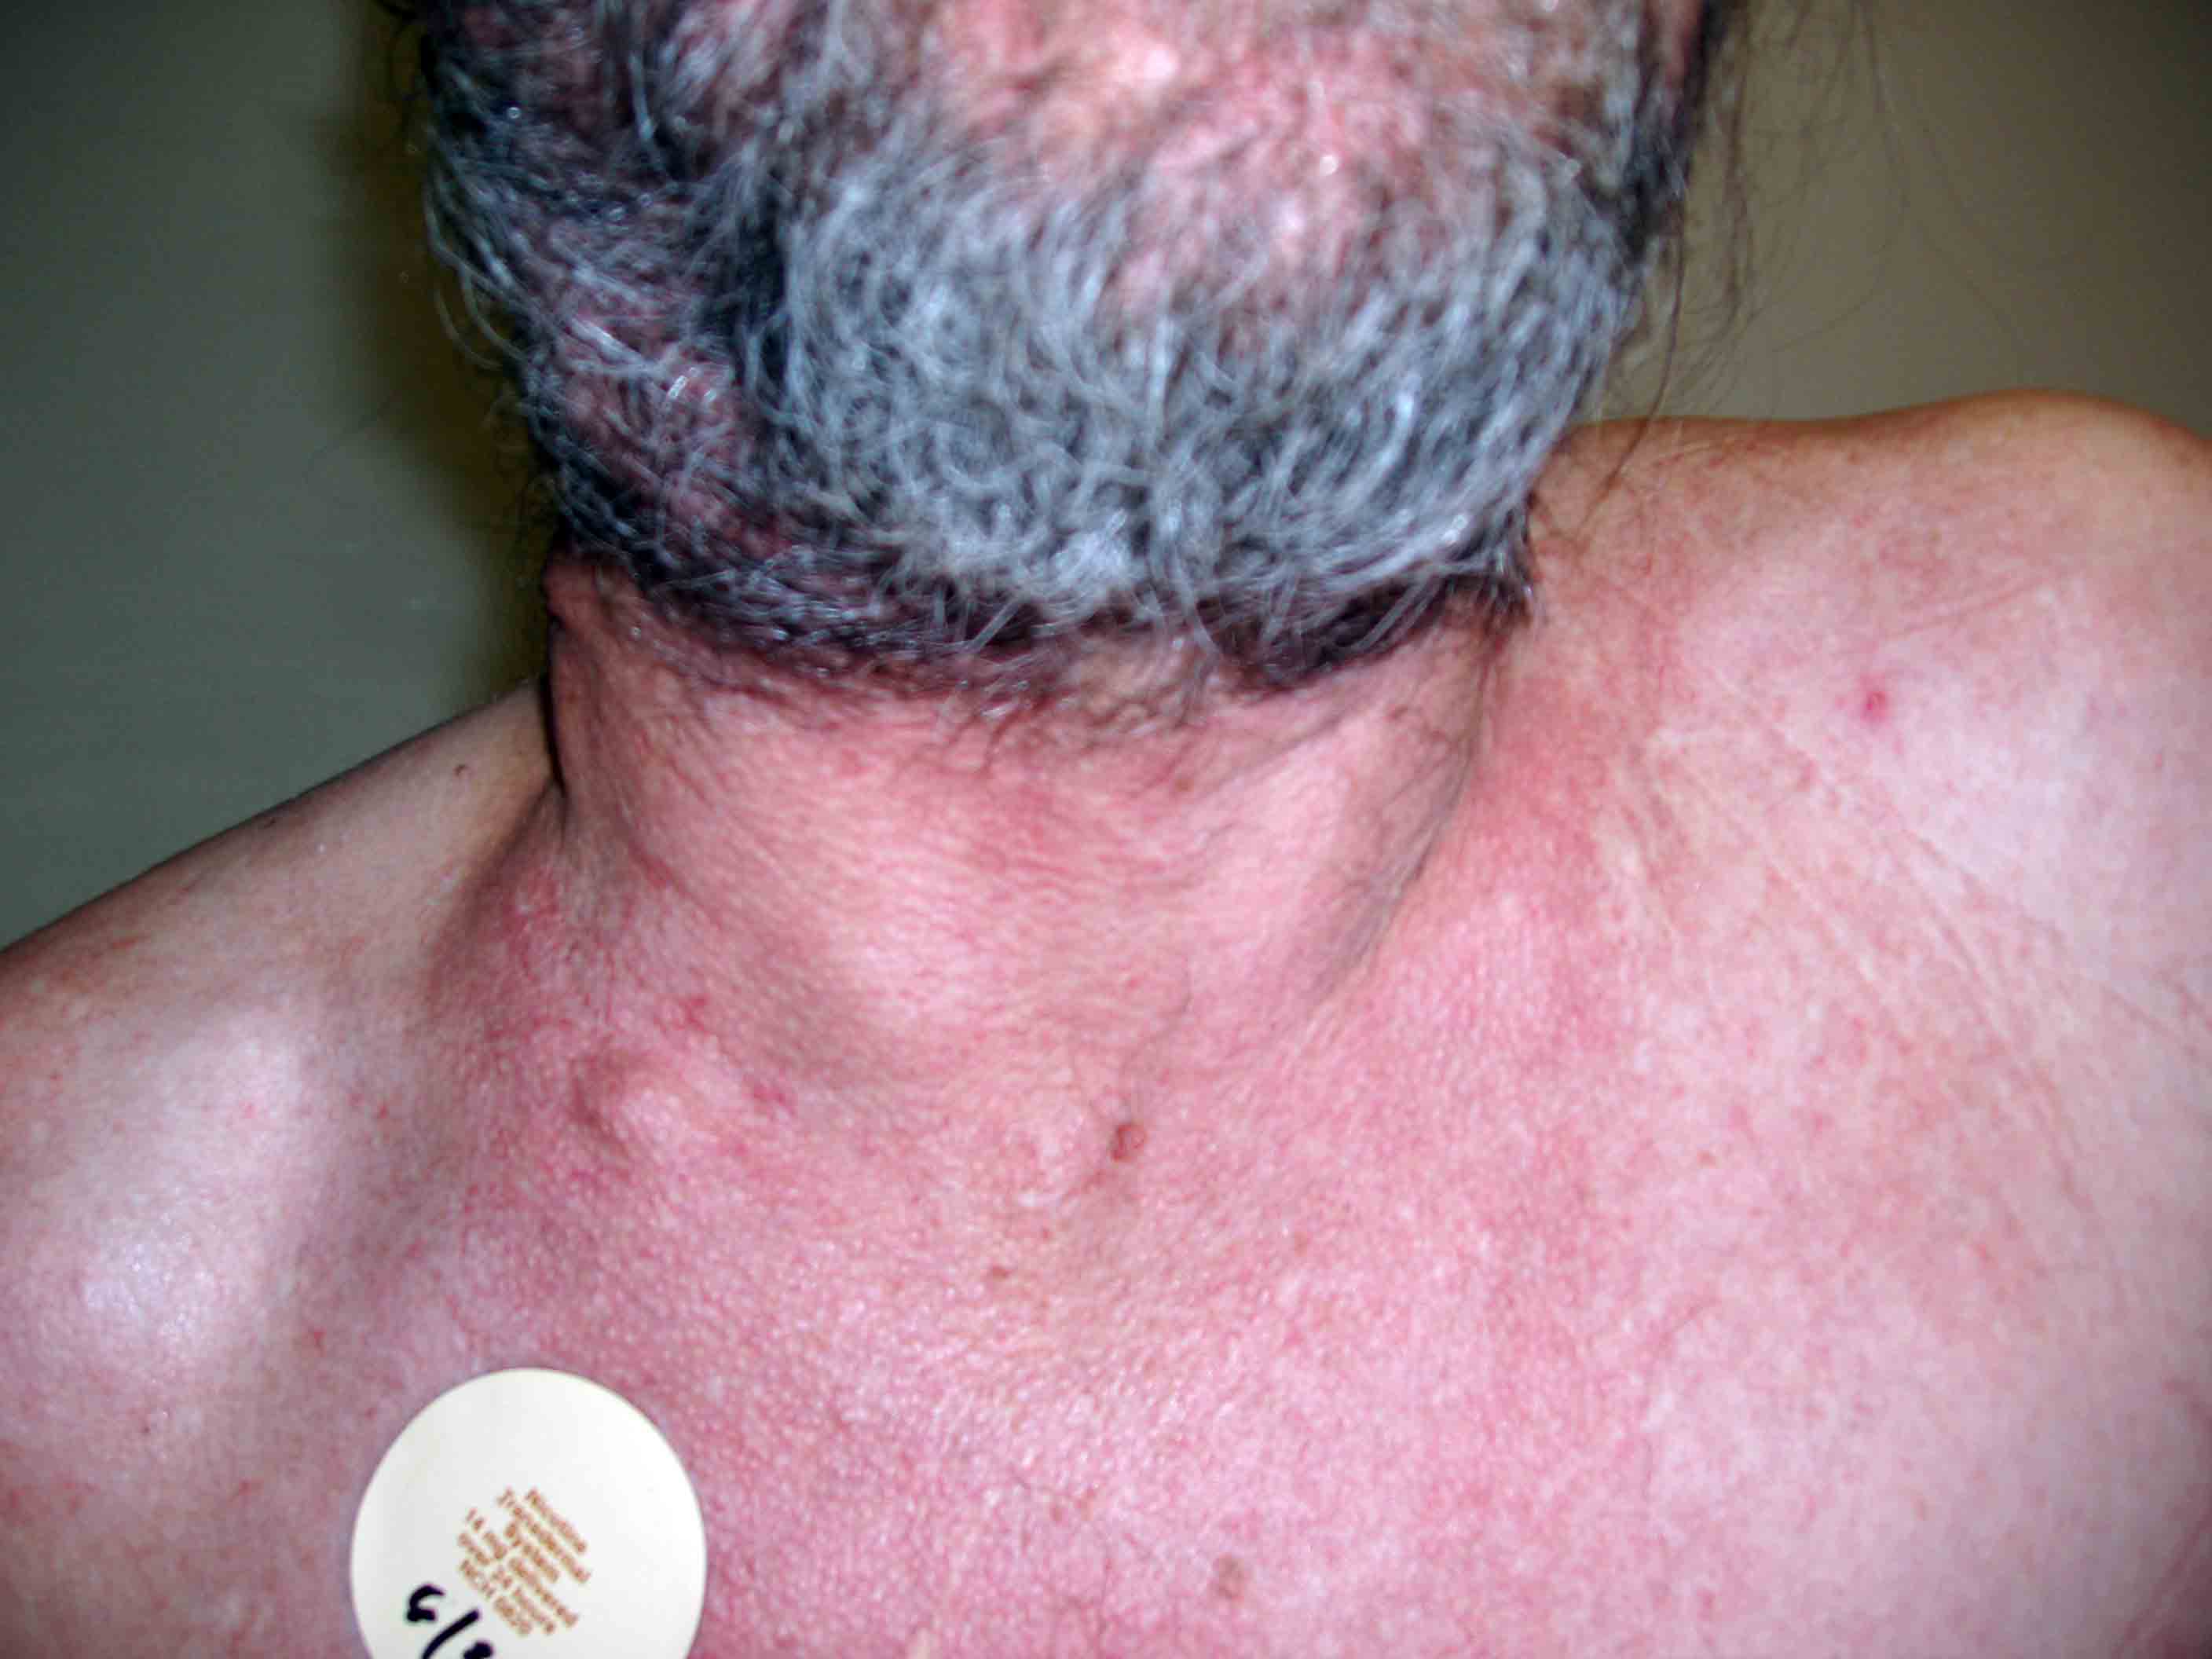 Cervical Adenopathy: multiple right-sided cervical lymph nodes. Images Courtesy of Charlie Goldberg, M.D., UCSD School of Medicine and VA Medical Center, San Diego, CA.